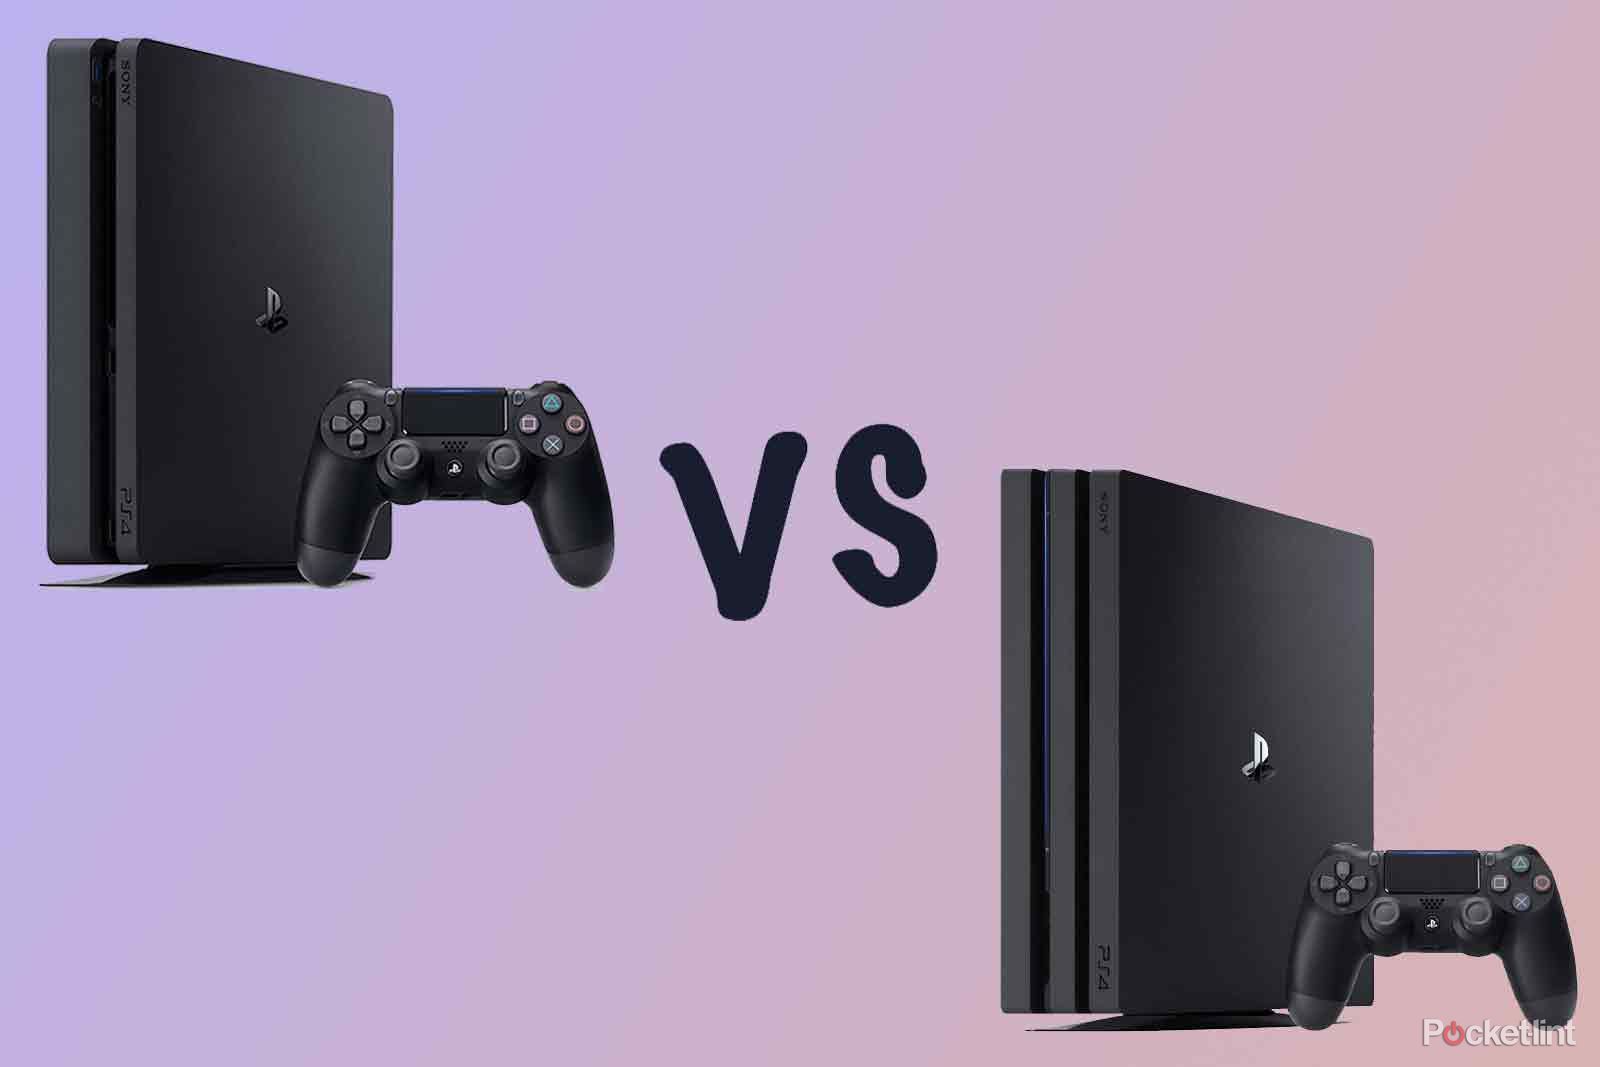 PS4 Pro Vs PS4 Slim: What's The Difference?